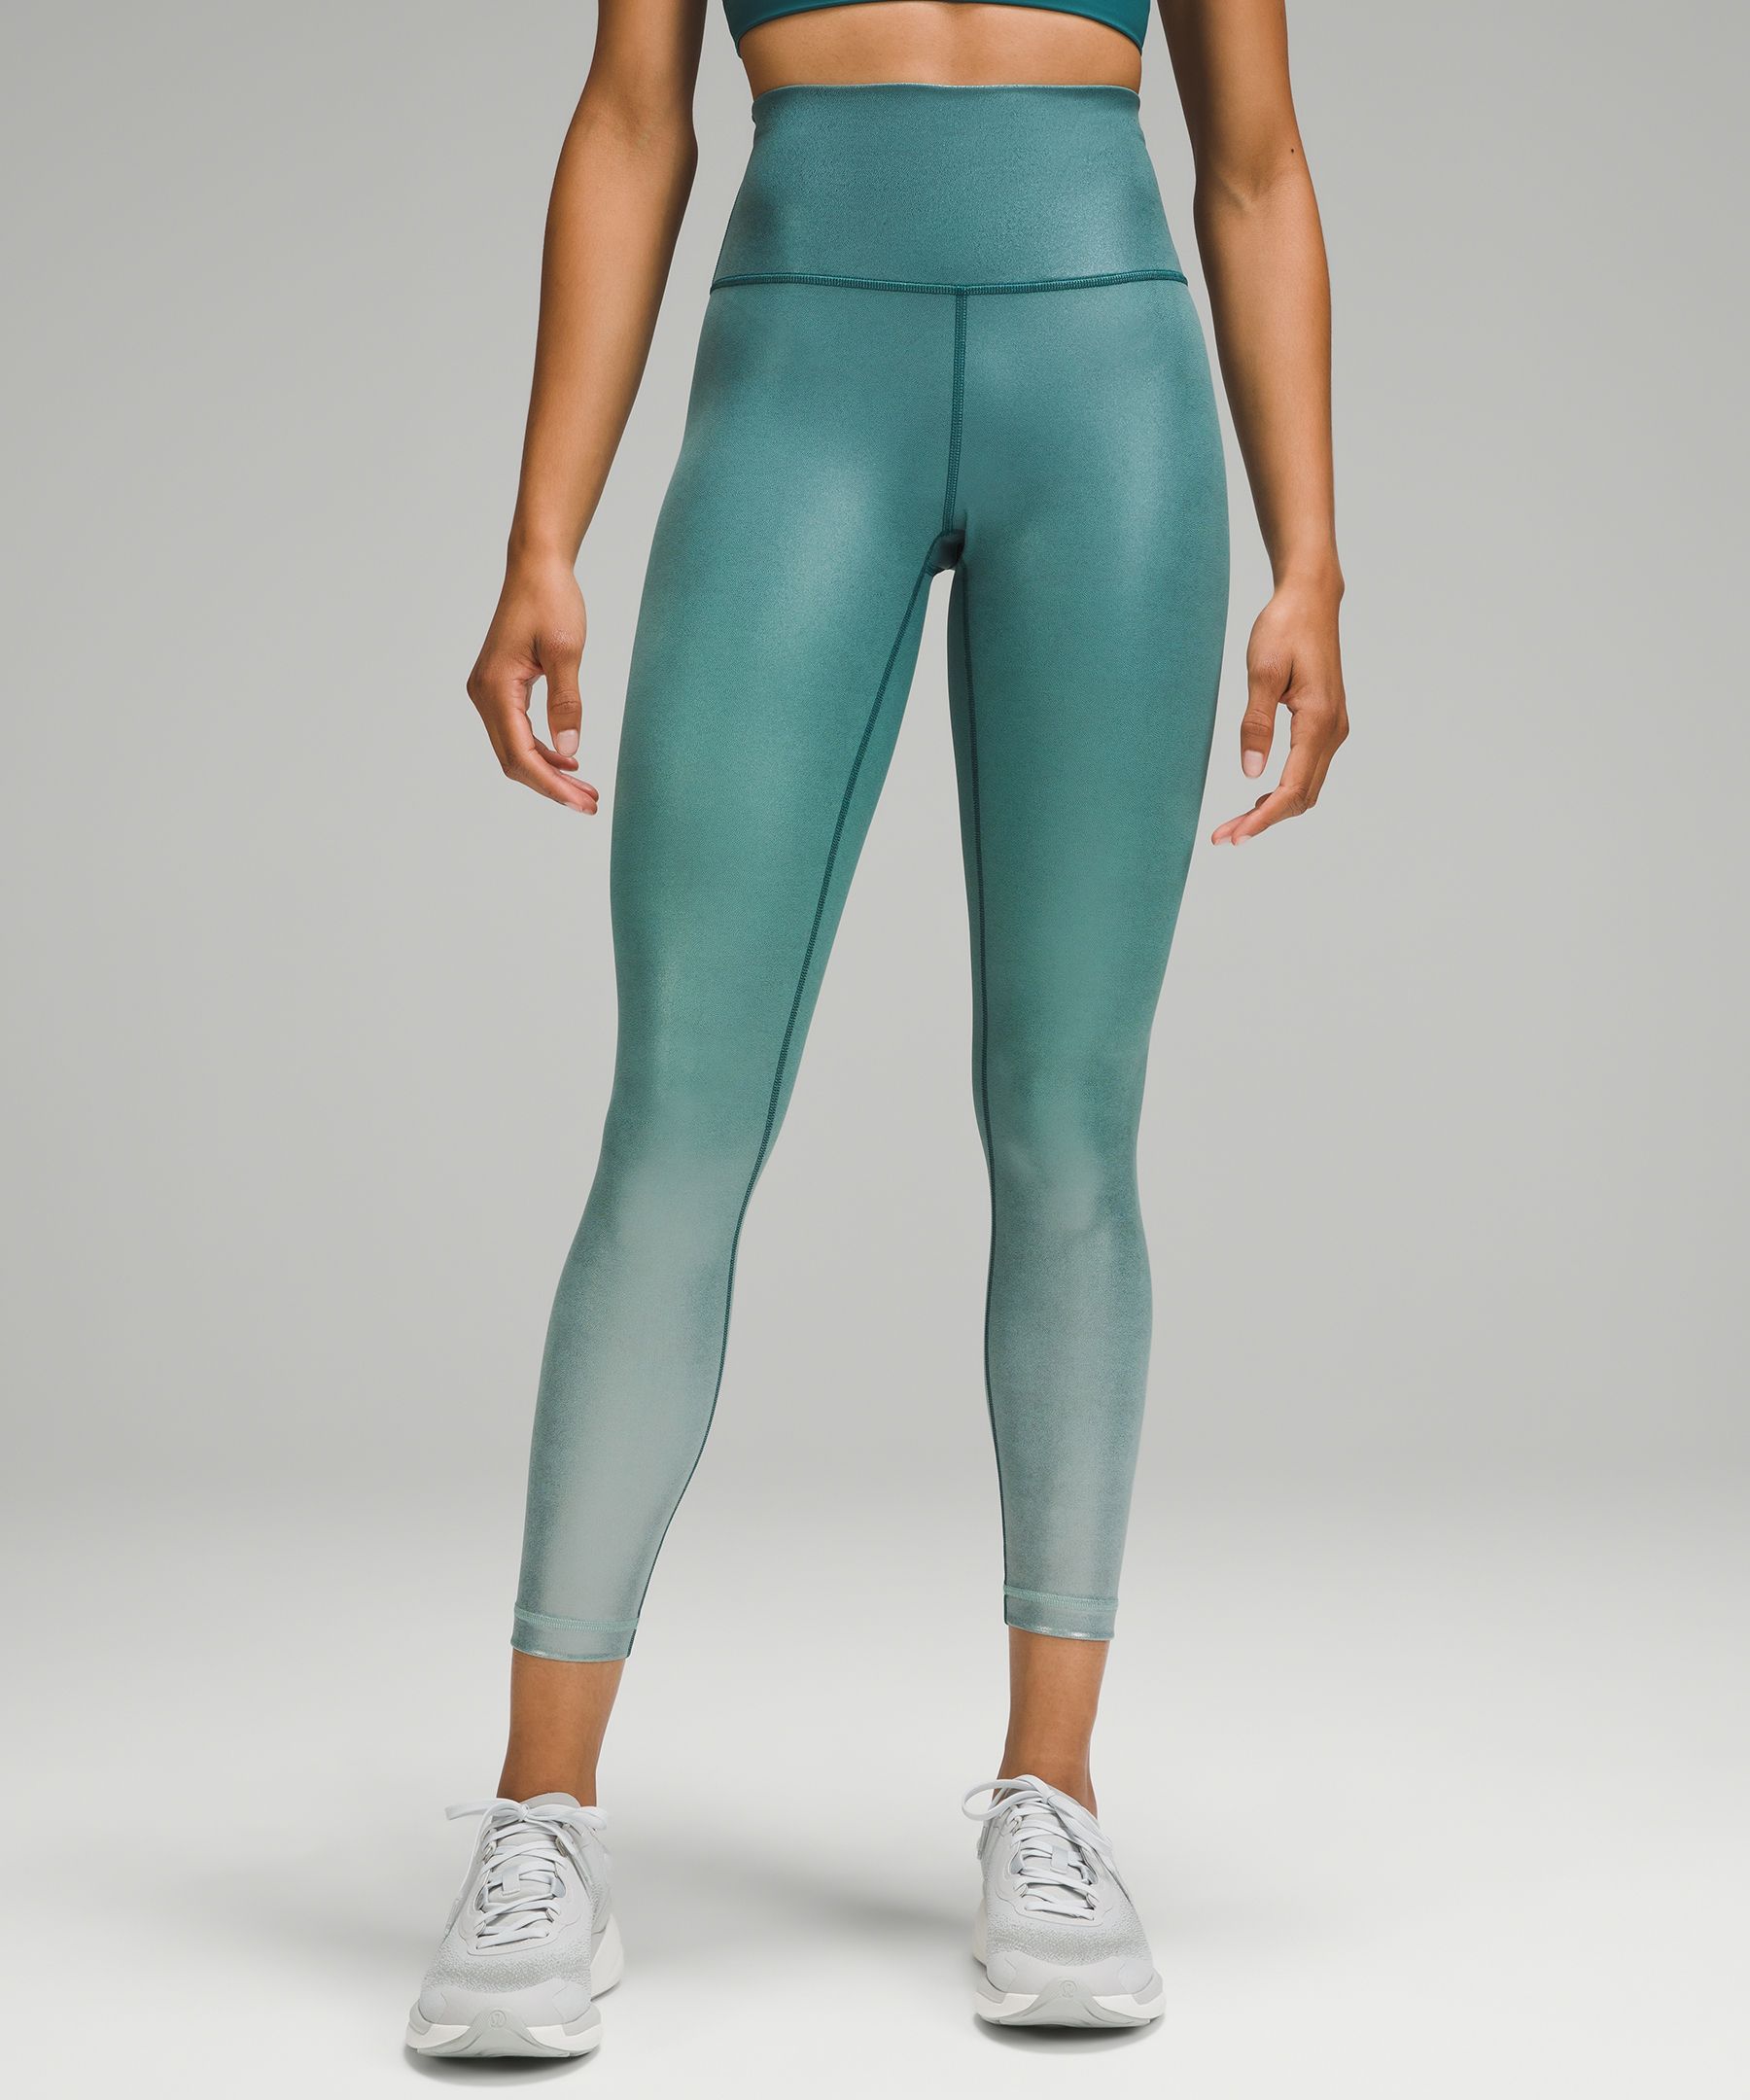 Lululemon NWT Wunder Train High-Rise Tight with Pockets 25